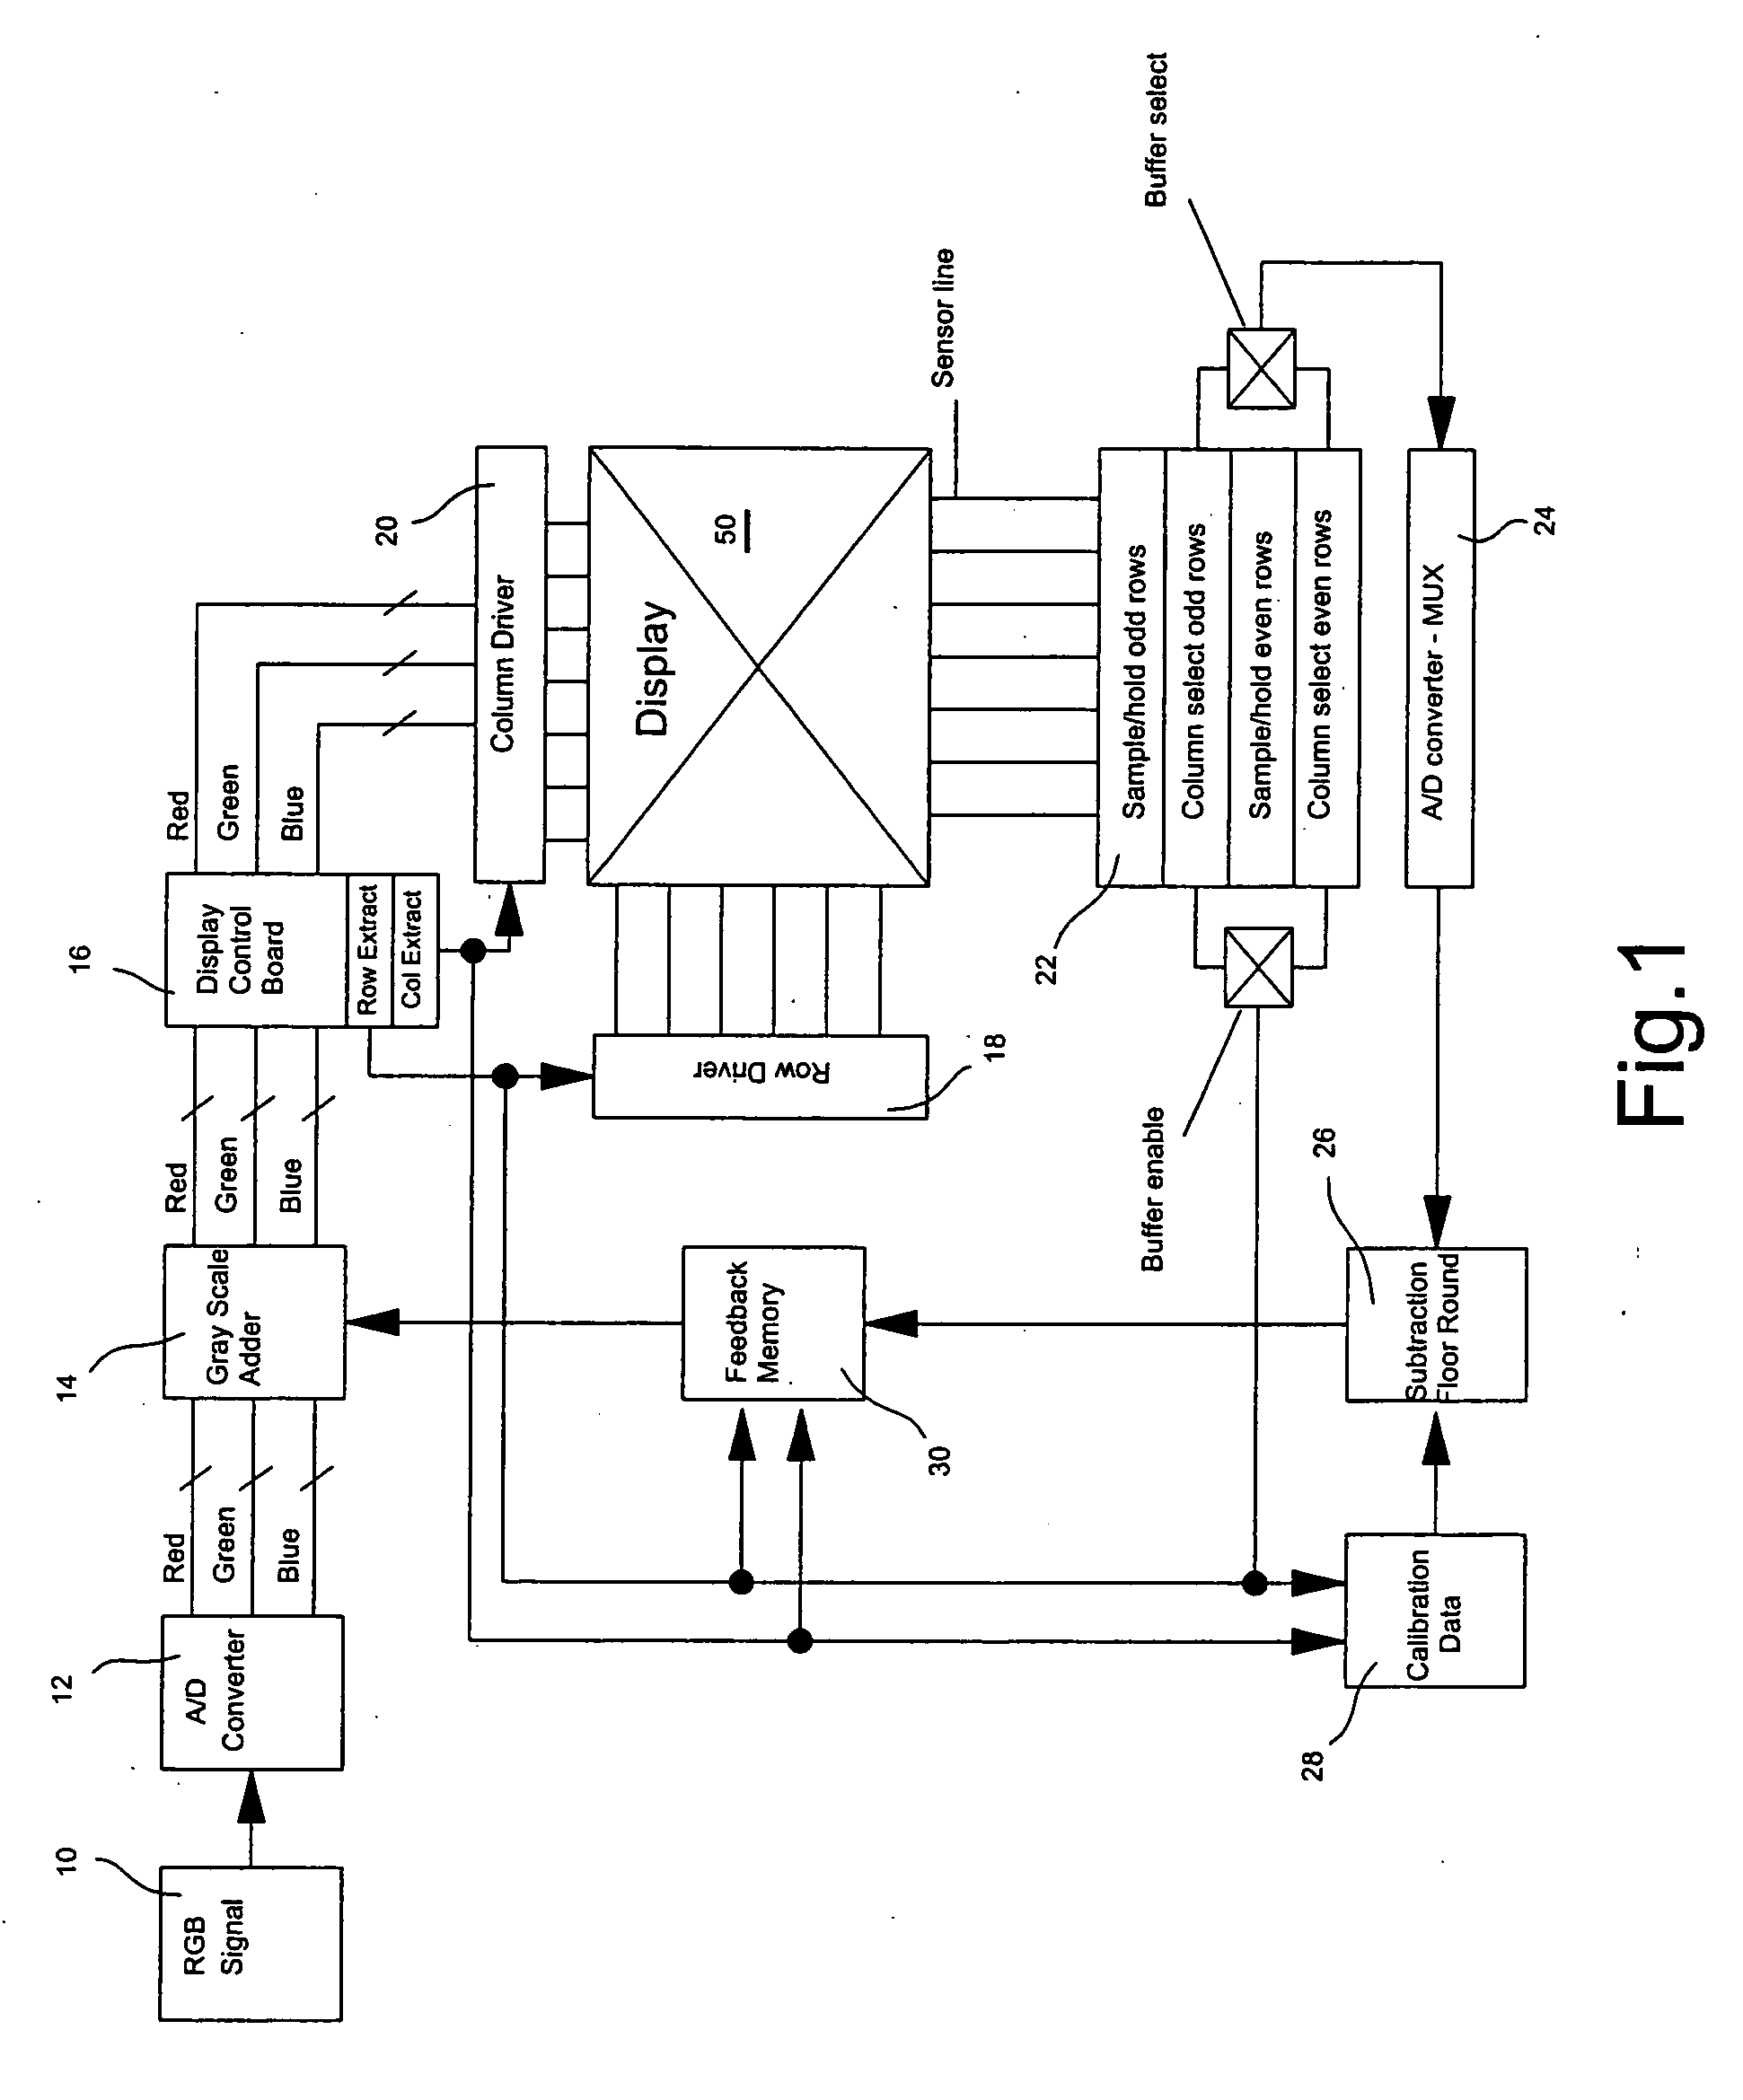 Feedback based apparatus, systems and methods for controlling emissive pixels using pulse width modulation and voltage modulation techniques